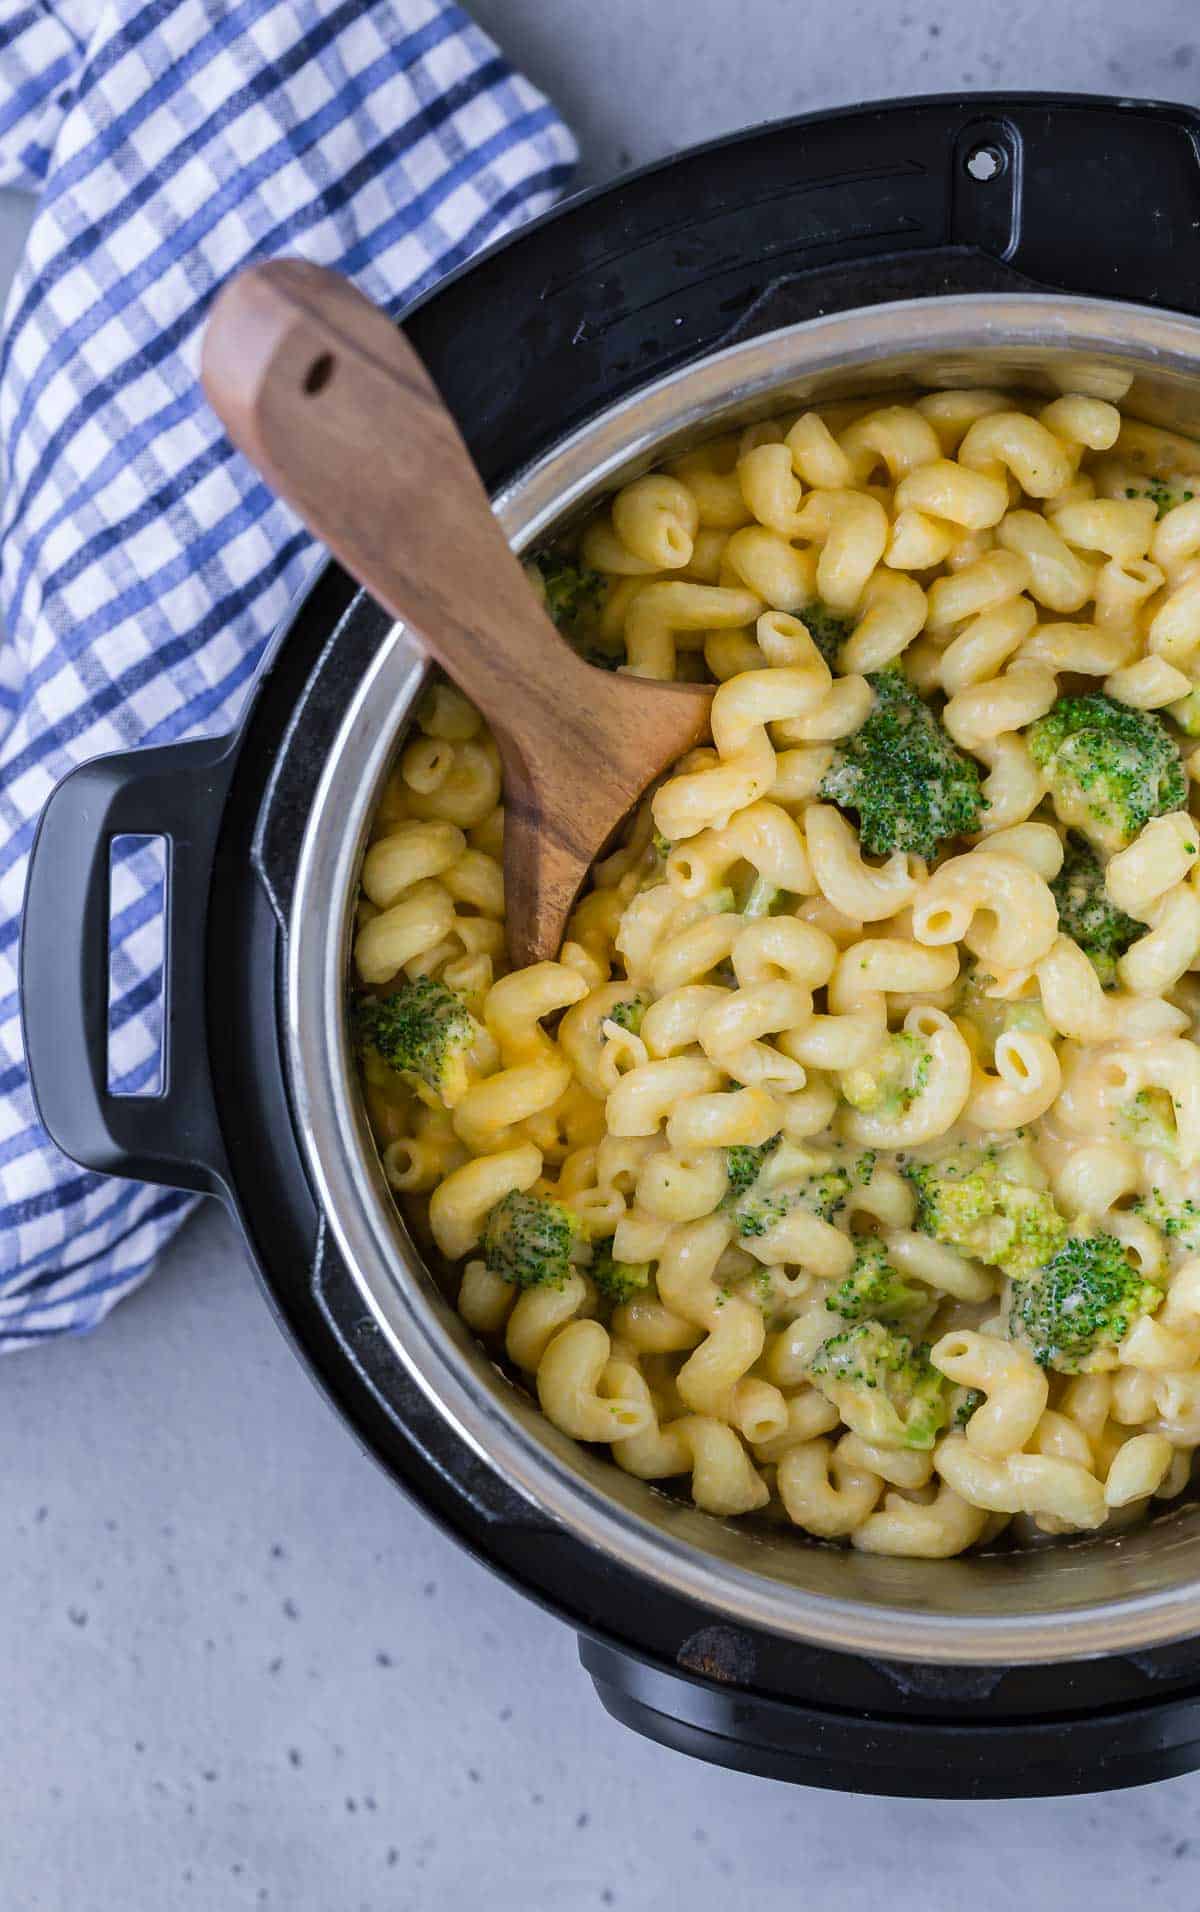 Overhead view of an instant pot pressure cooker filled with macaroni and cheese with broccoli. Wooden spoon also visible.